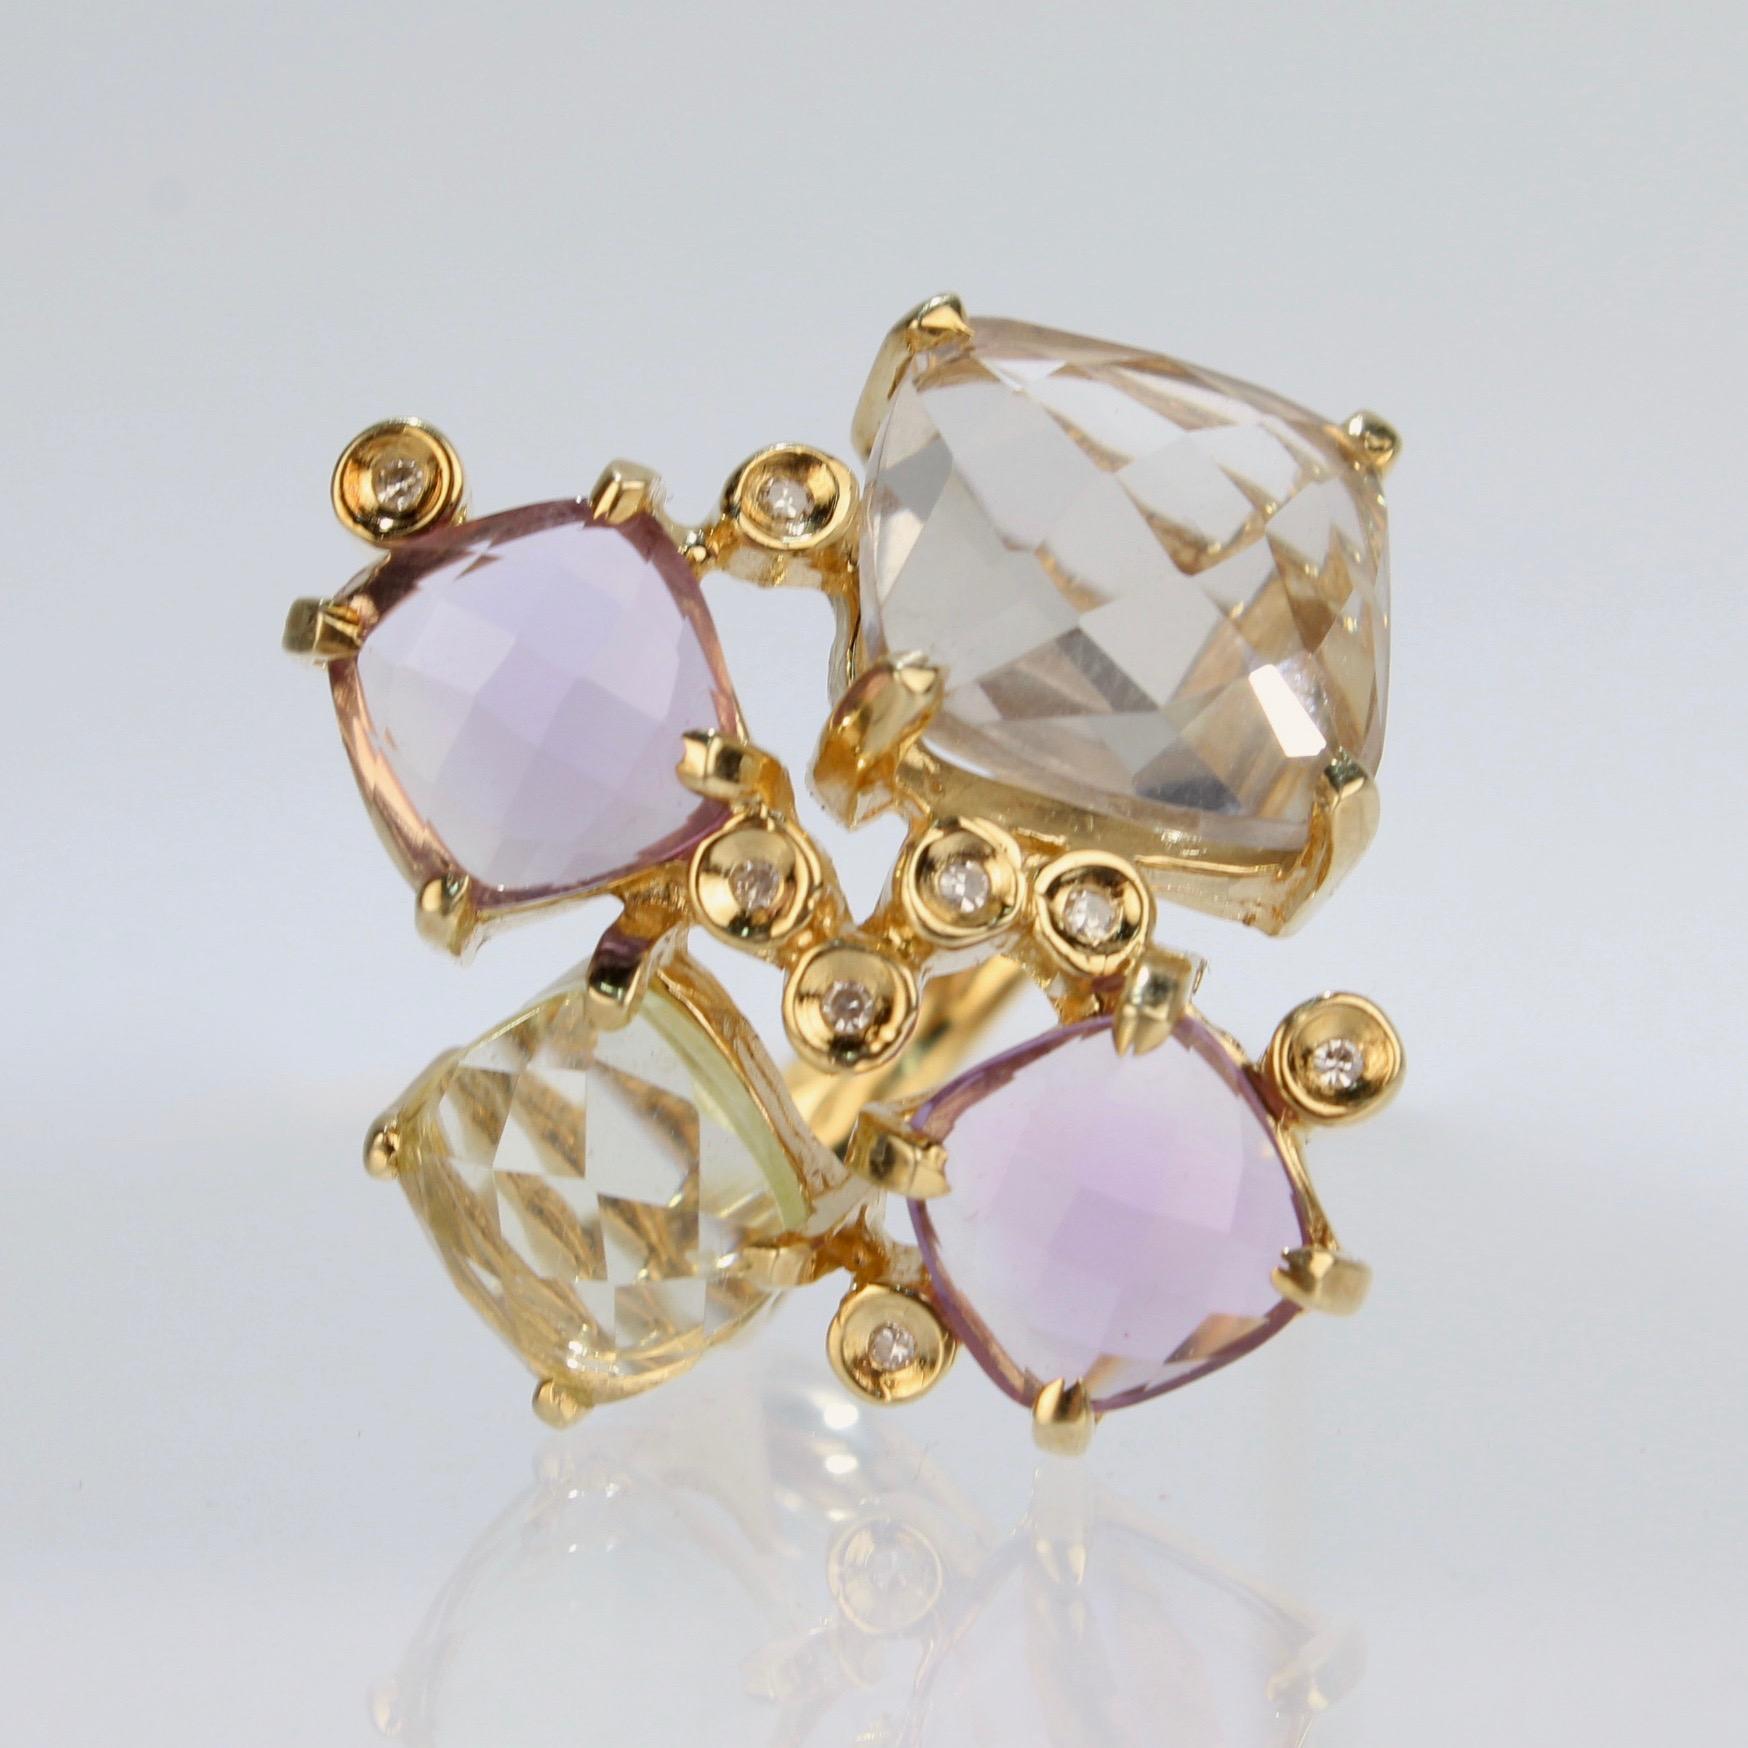 A wonderfully designed Modernist gemstone cluster cocktail ring in 18K gold.

With prong-set, faceted amethyst and citrine cabachon gemstones in varying shades that are interspersed with small, bezel set diamonds.

The stones are set in a convex arc